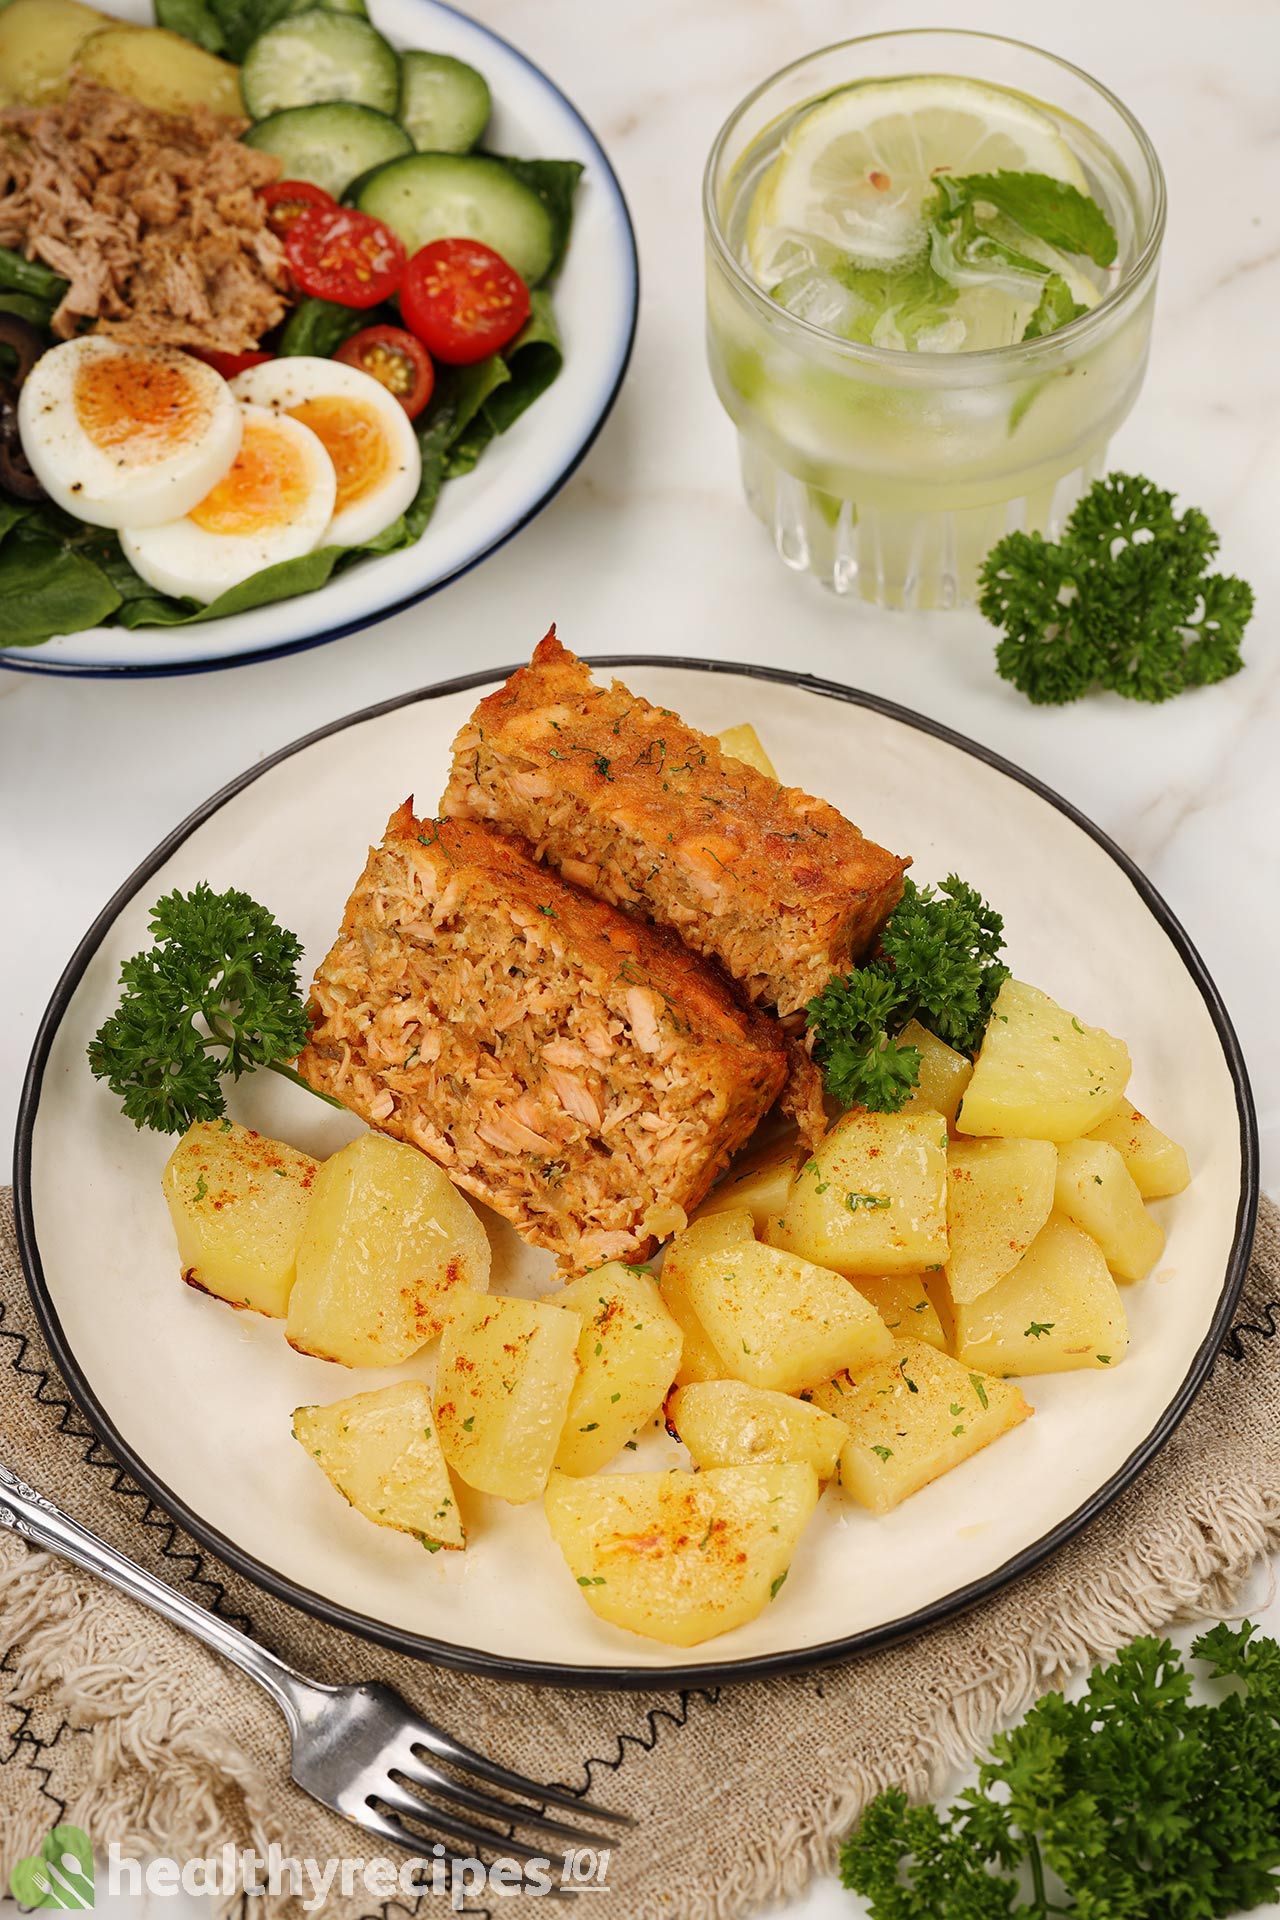 What to Serve With Salmon Loaf